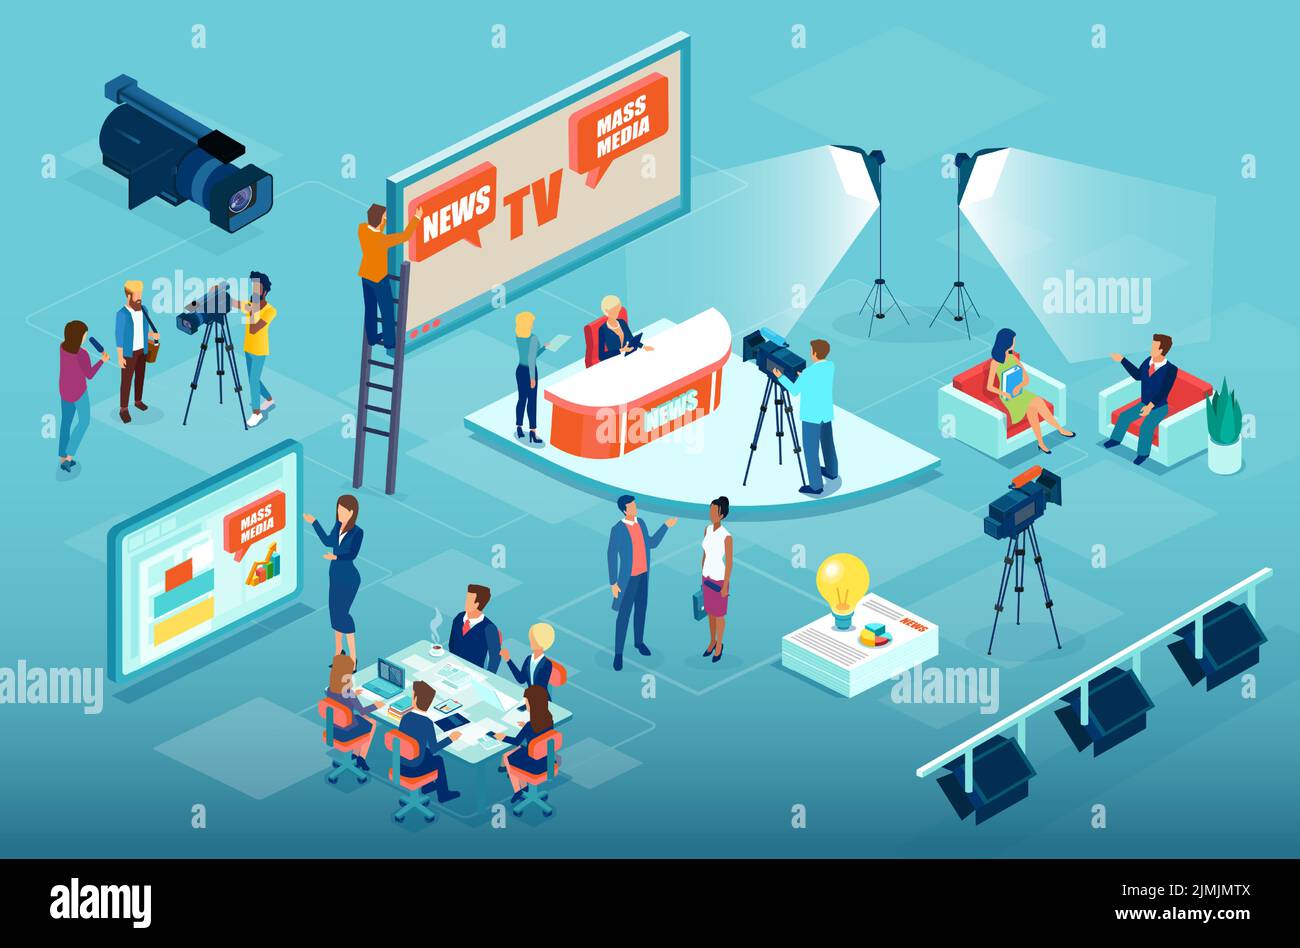 Mass media production process and business management with journalists preparing news materials, operators and interviewers and business executives di Stock Vector